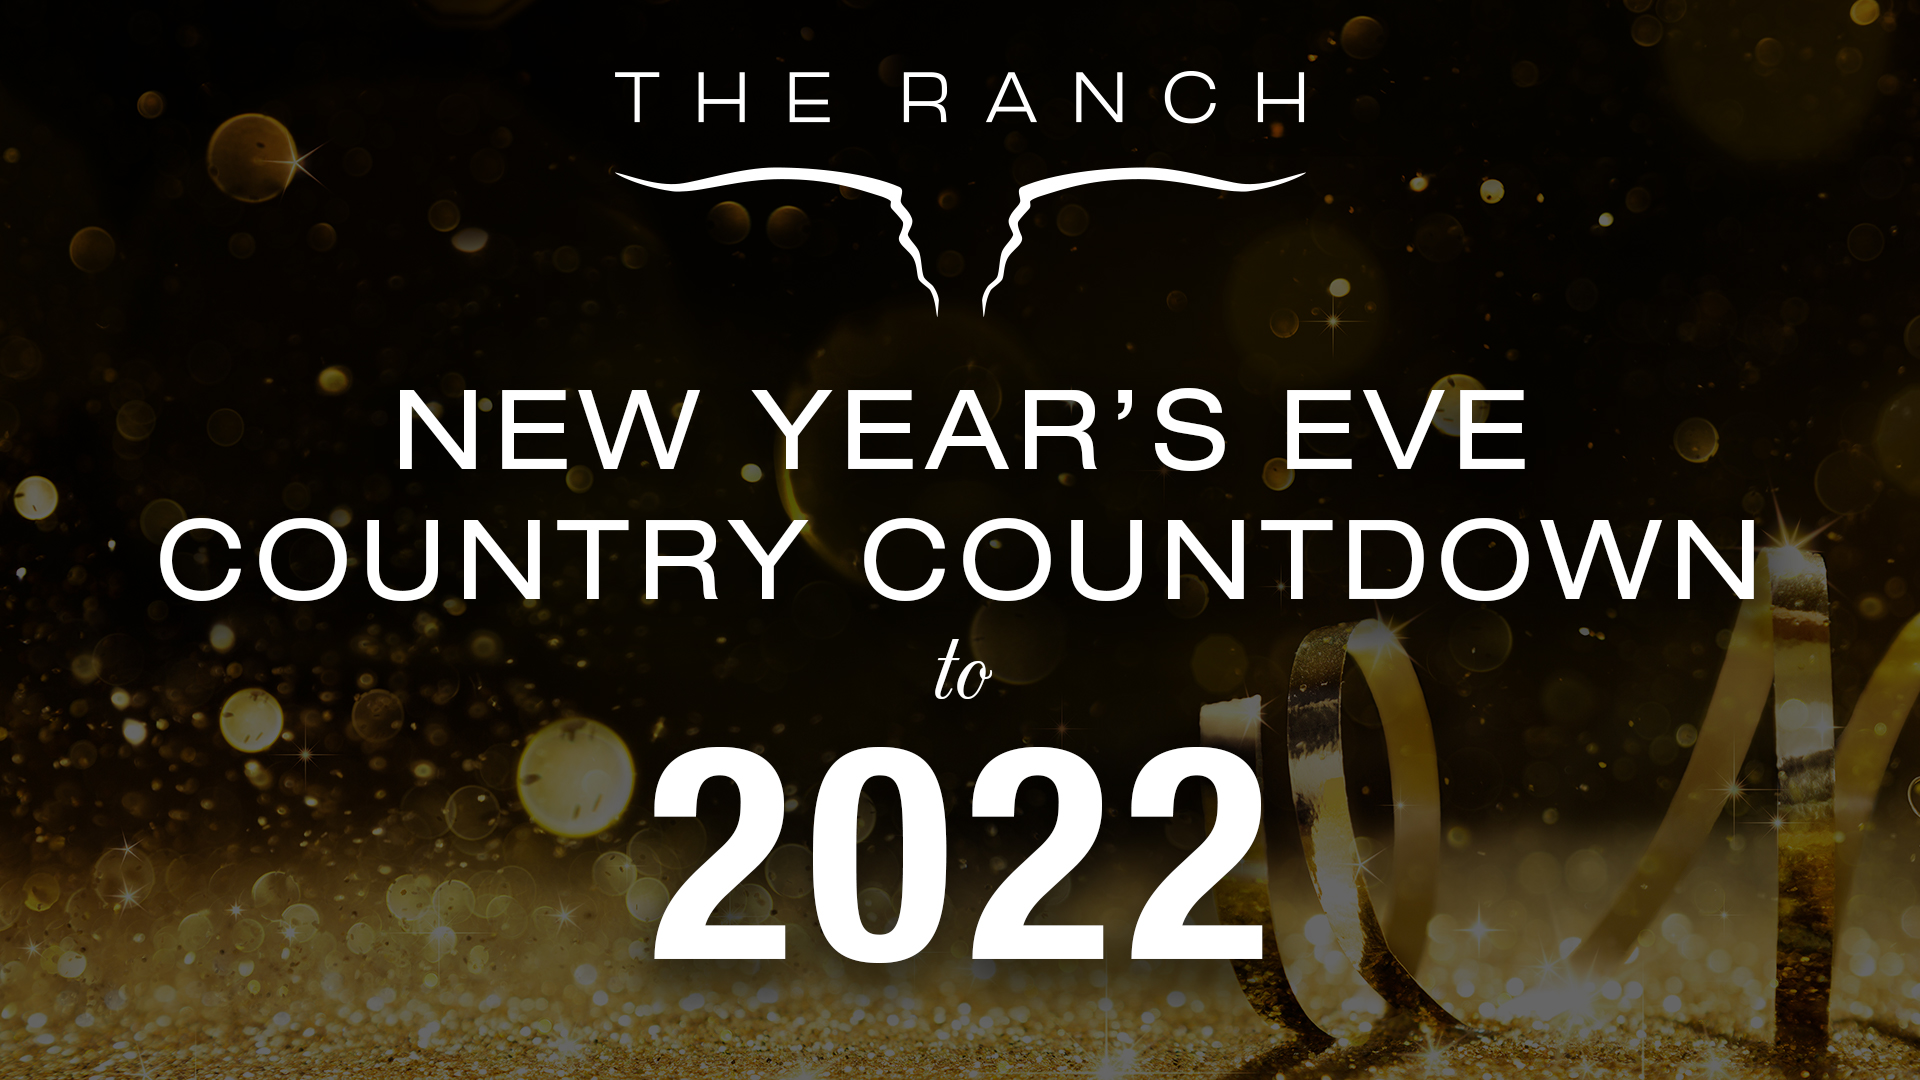 THE RANCH Saloon New Year's Eve 2022 Concert Event with the Country Club Band December 31st, 2021